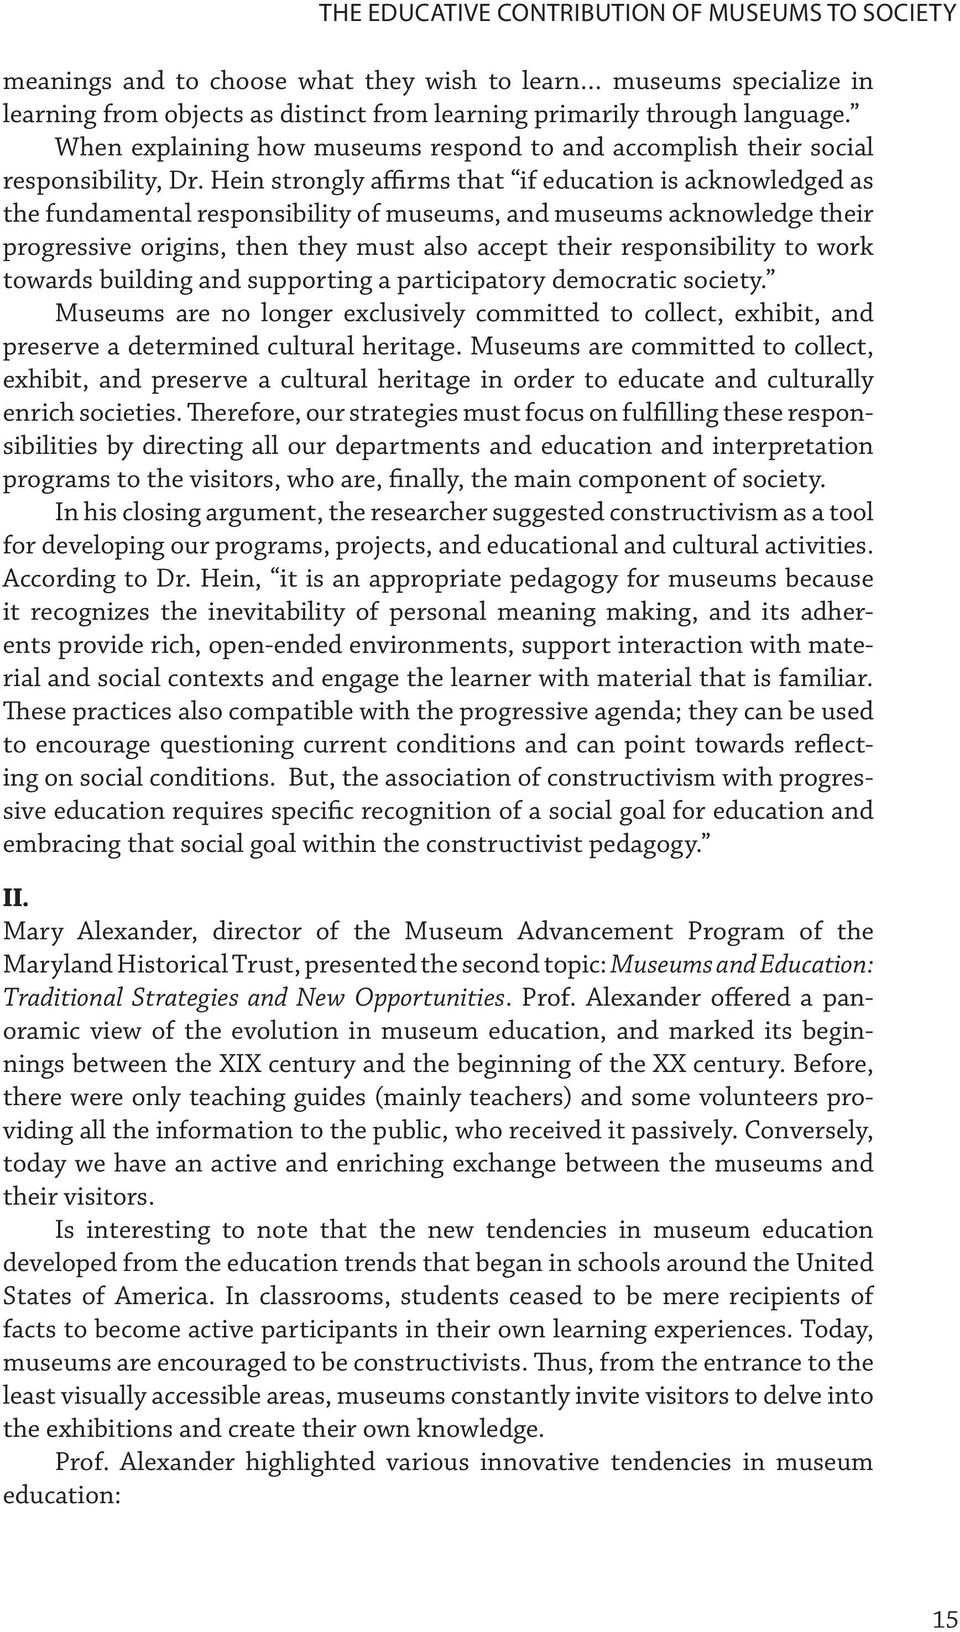 Hein strongly affirms that if education is acknowledged as the fundamental responsibility of museums, and museums acknowledge their progressive origins, then they must also accept their